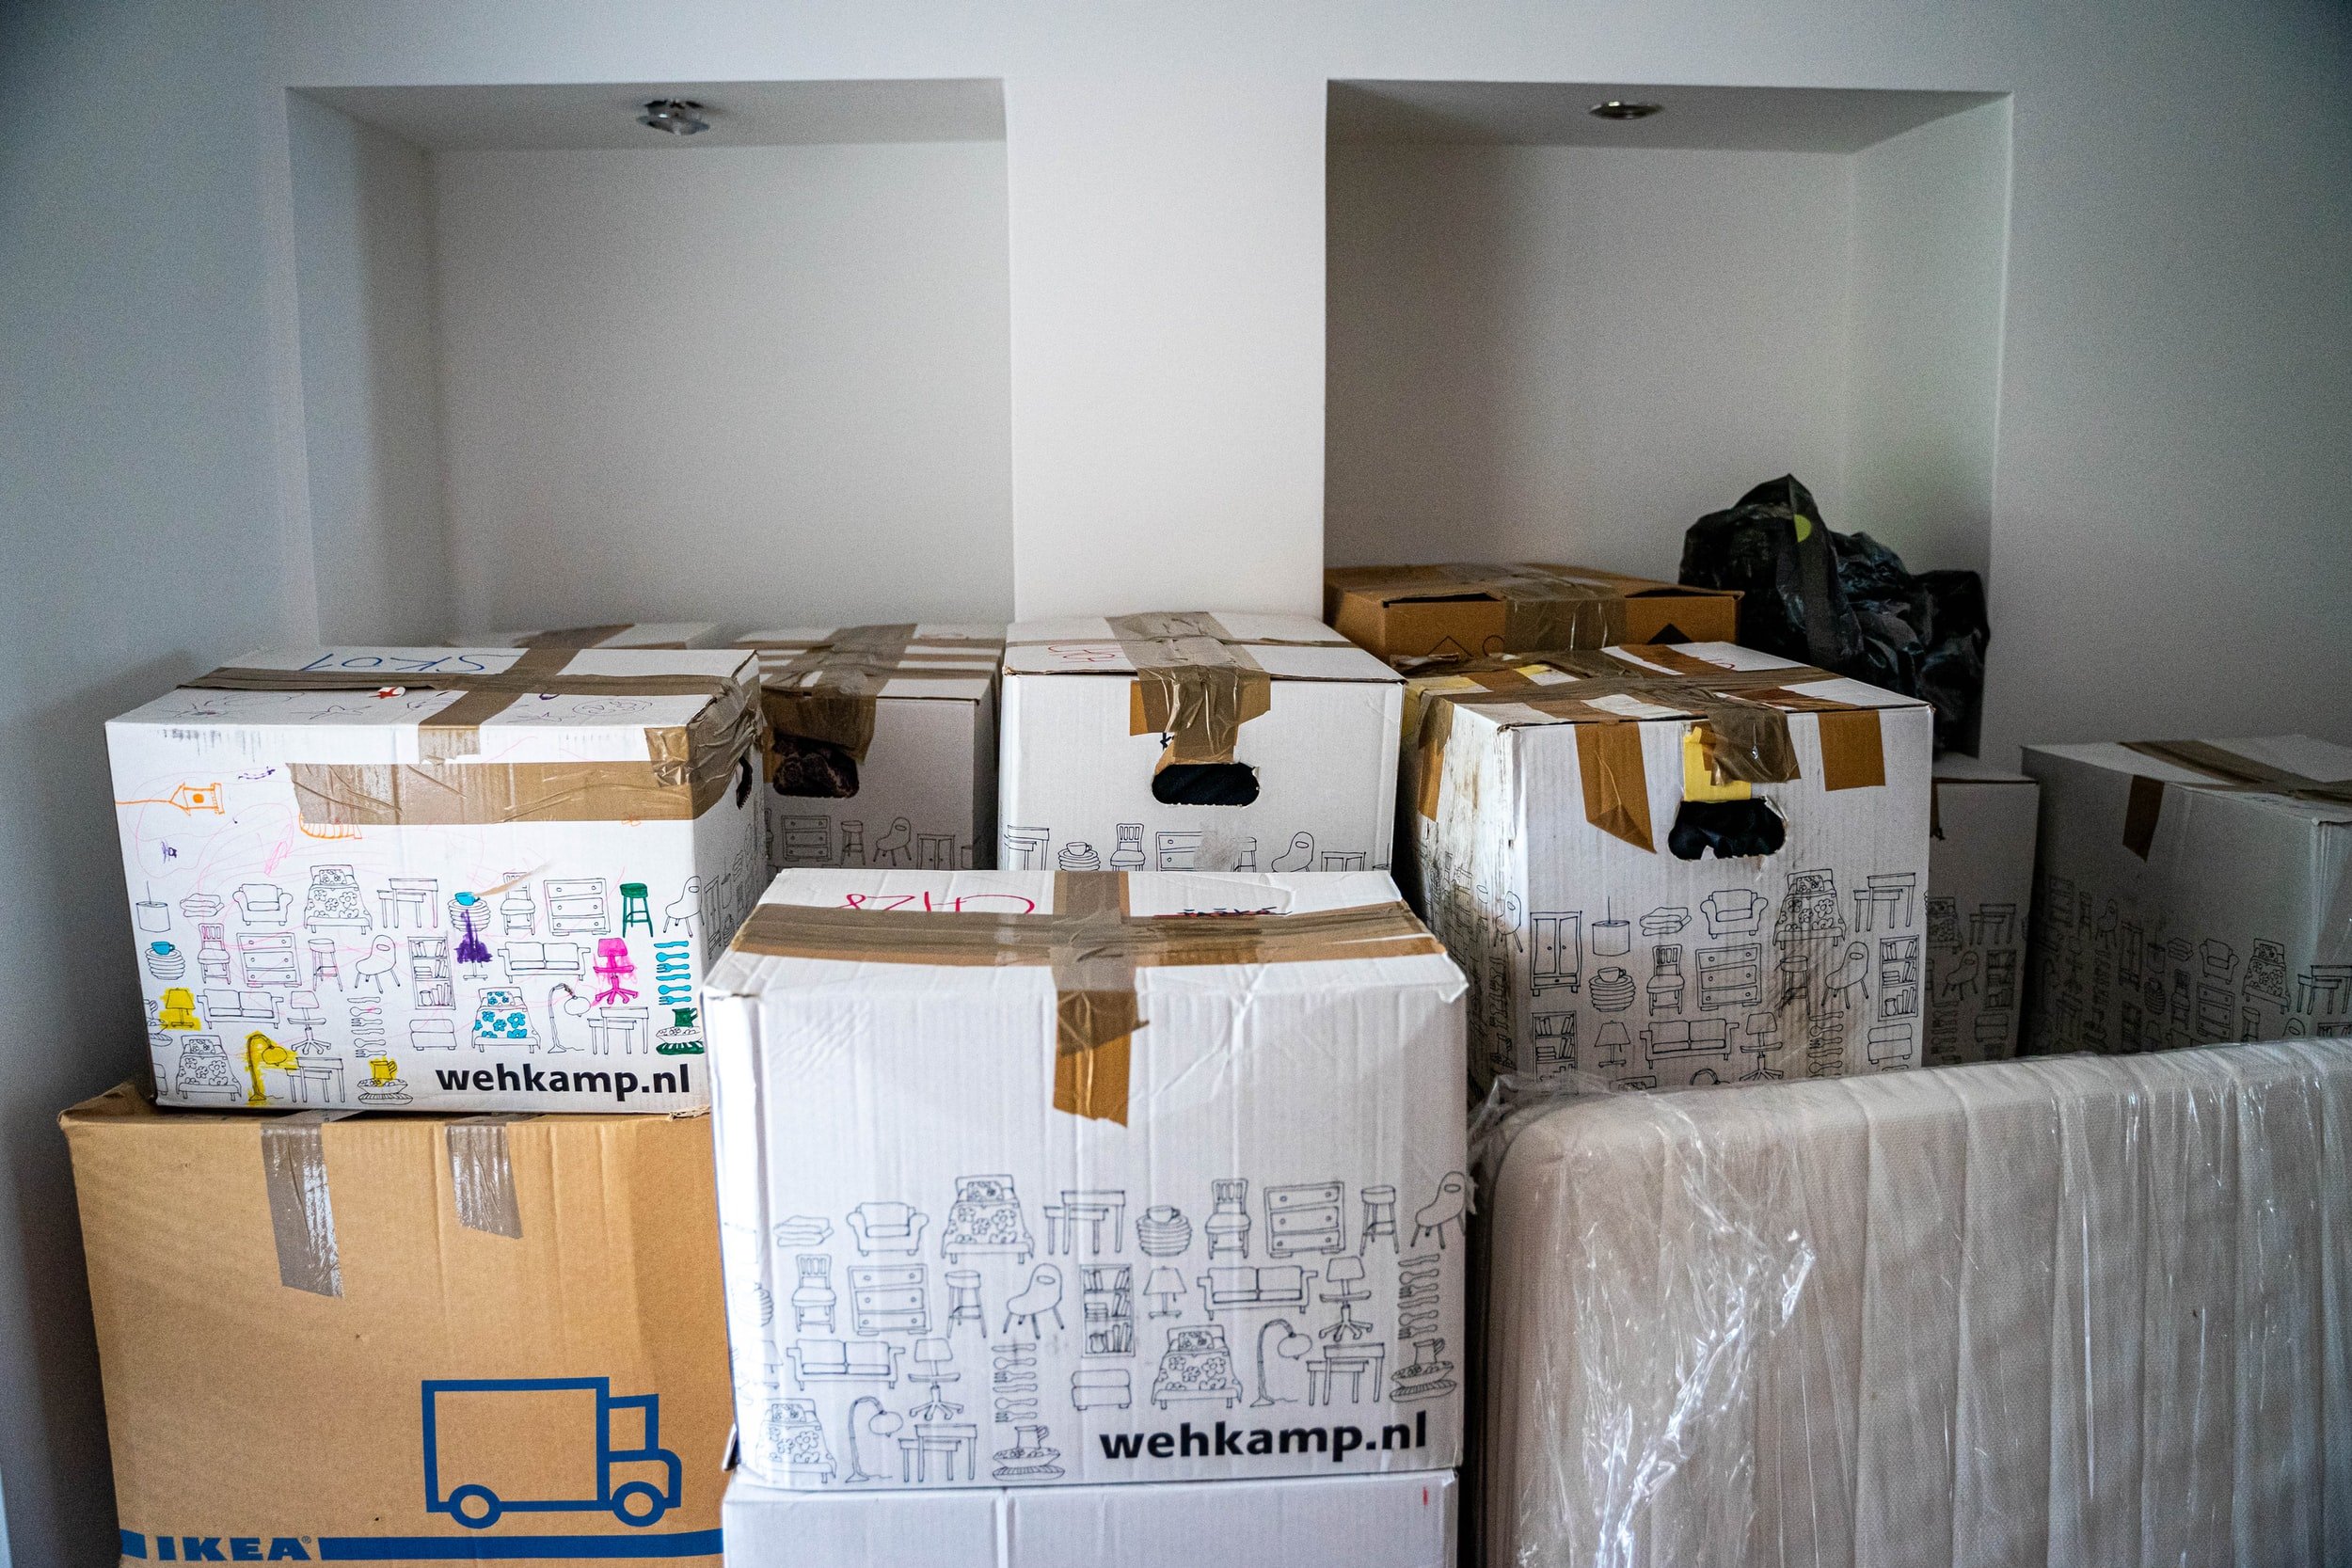 A stack of battered moving boxes in a white room.